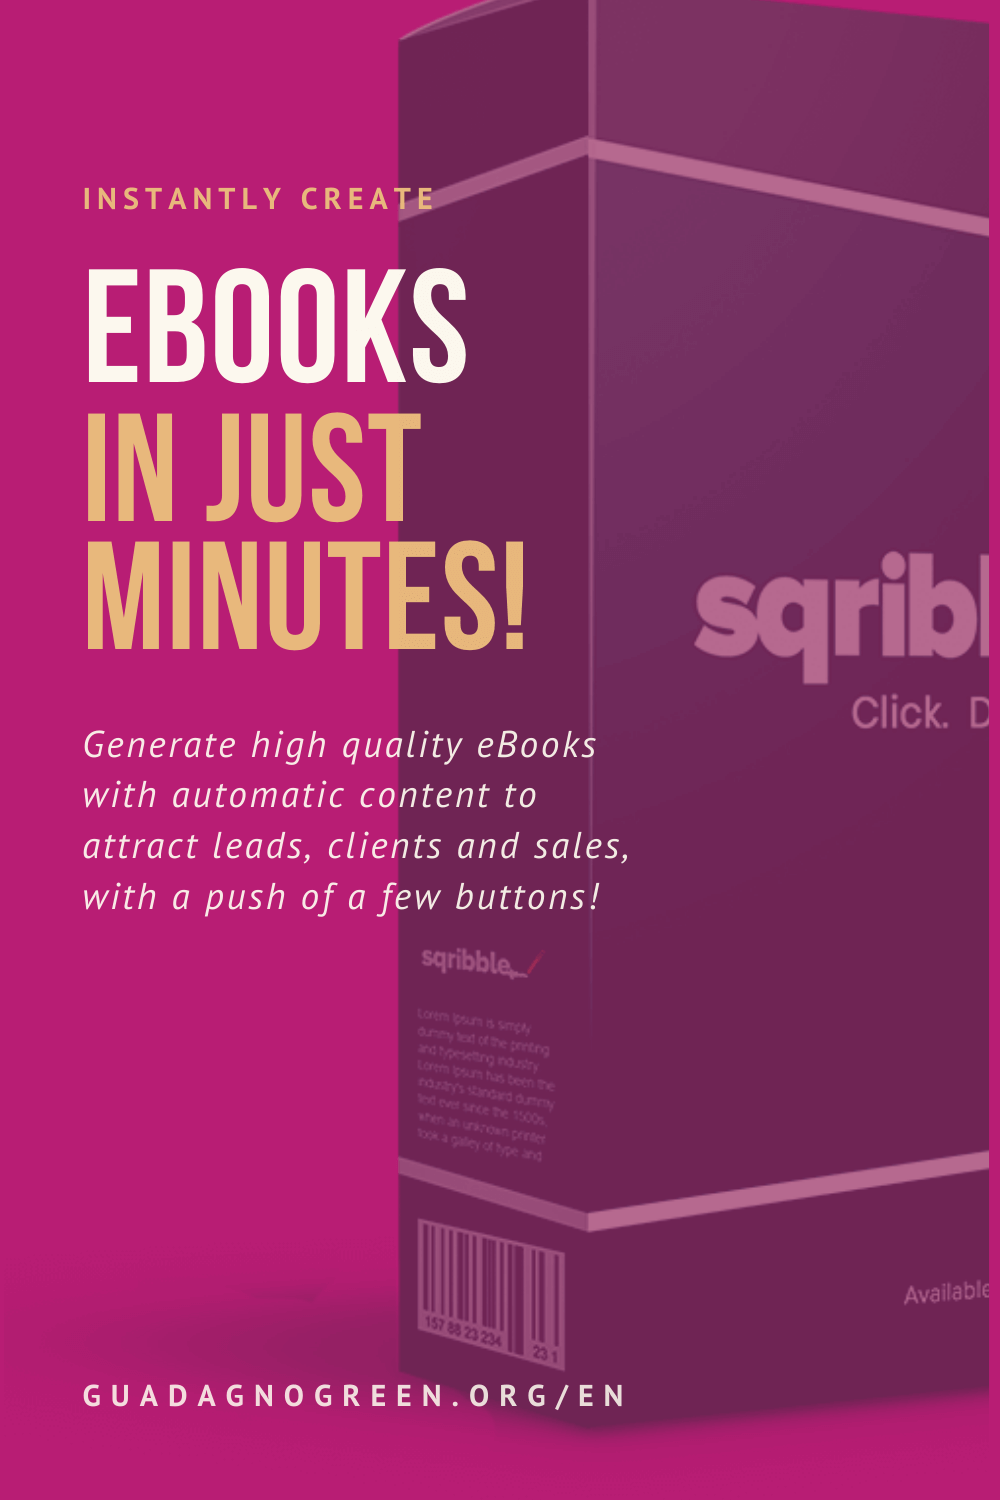 what-is-sqribble-ebook-creator-tool-review